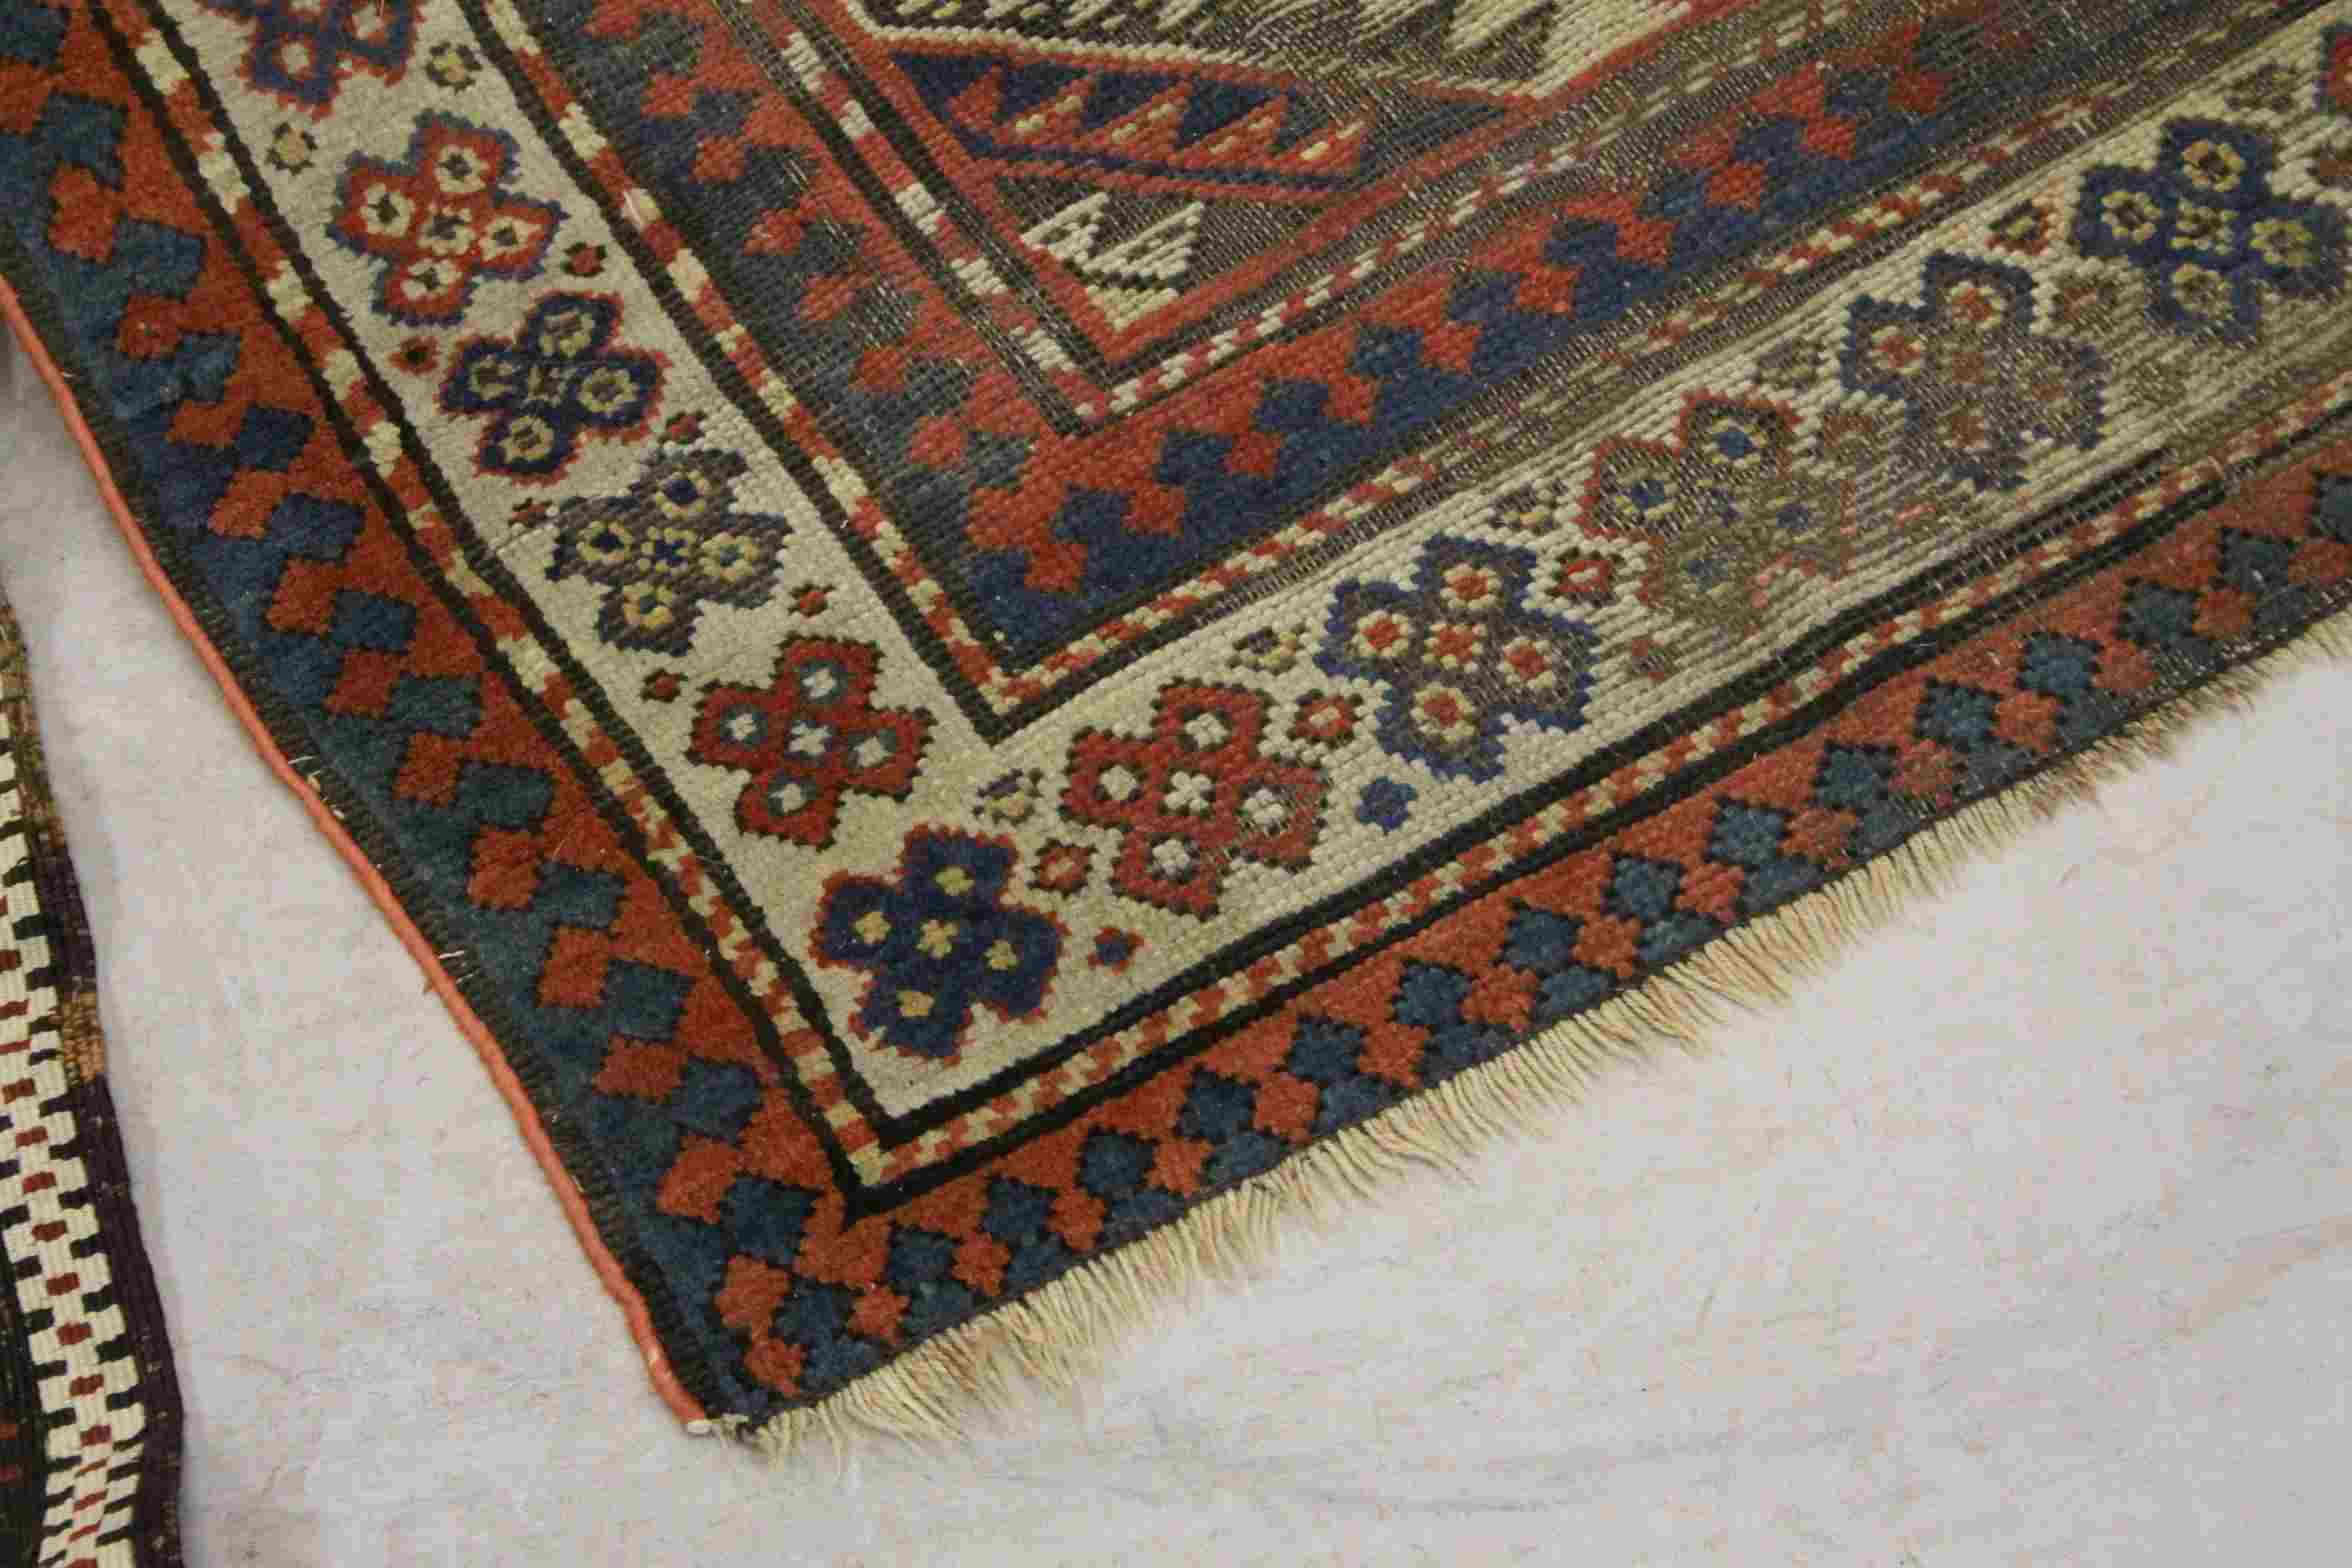 Eastern Red and Blue Ground Rug 300cms x 125cms together with another Rug 182cms x 86cms - Image 6 of 9